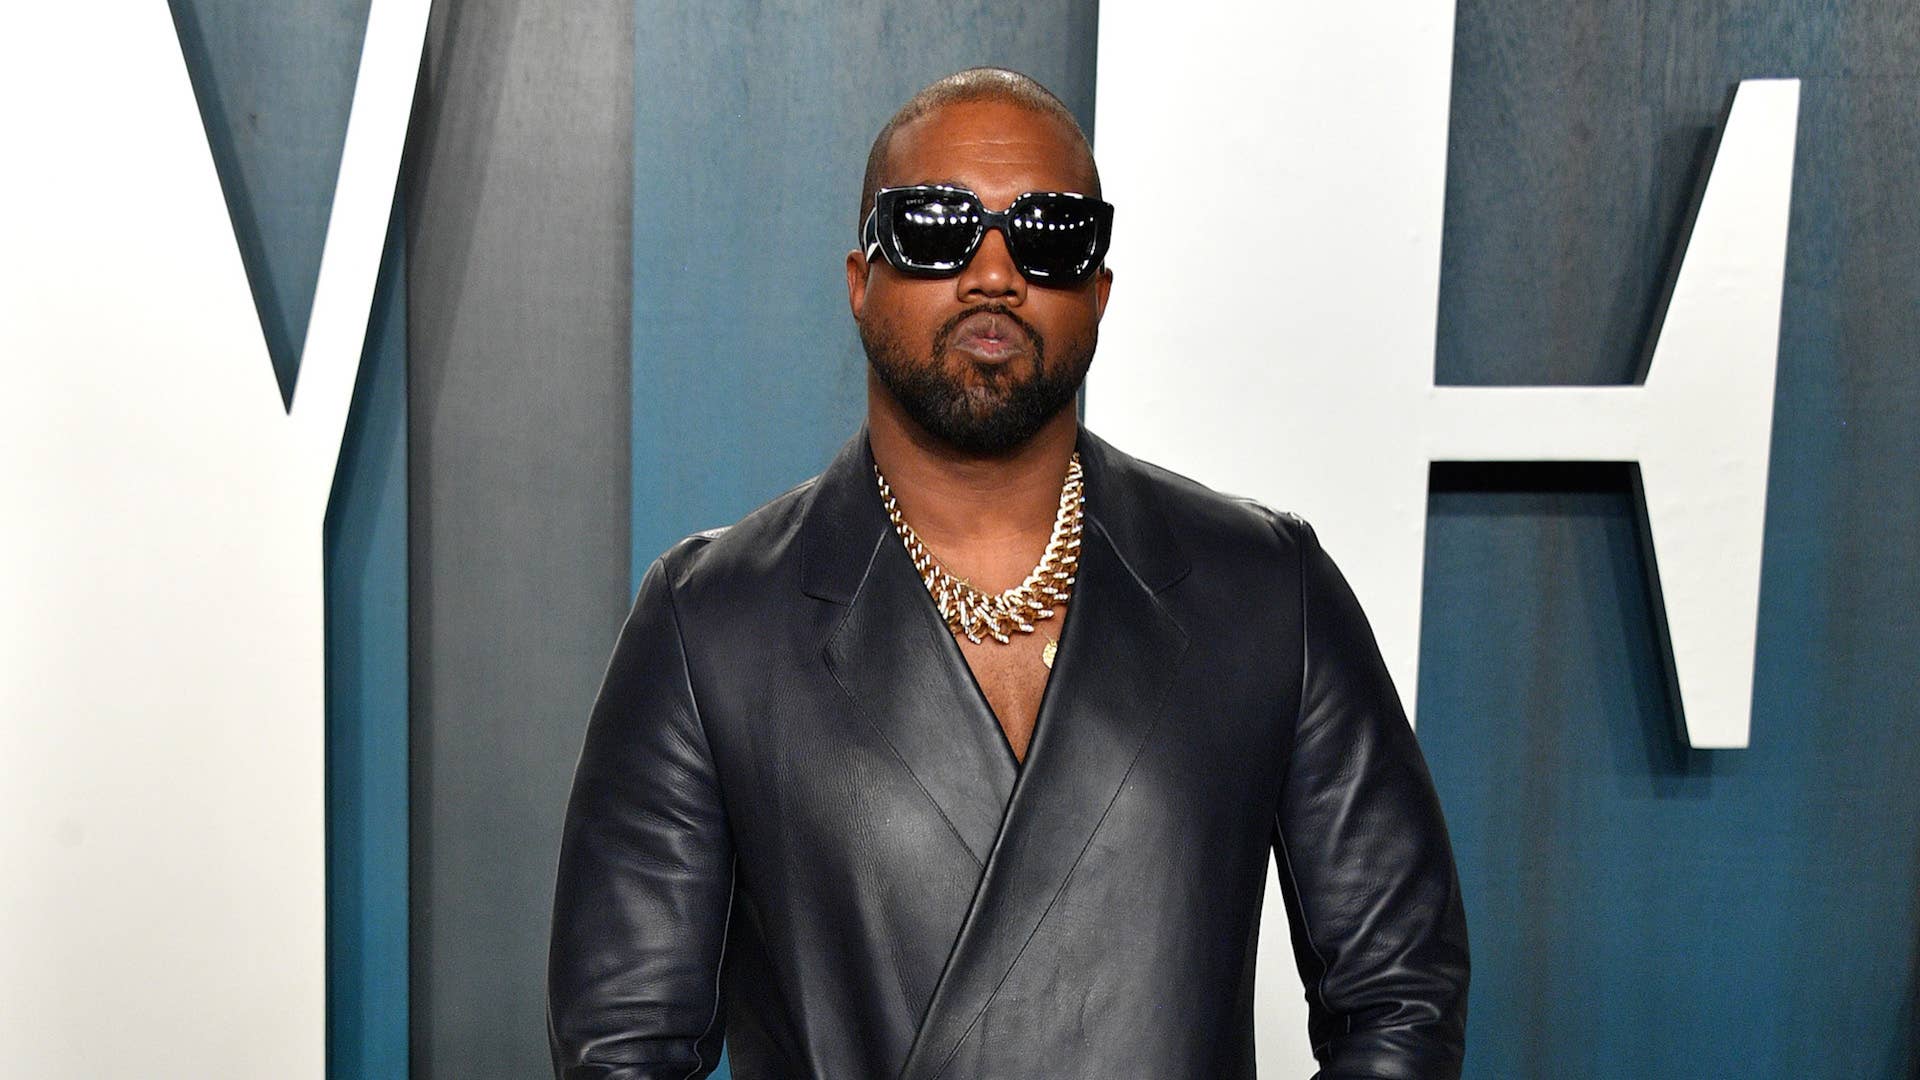 Kanye West attends the 2020 Vanity Fair Oscar party